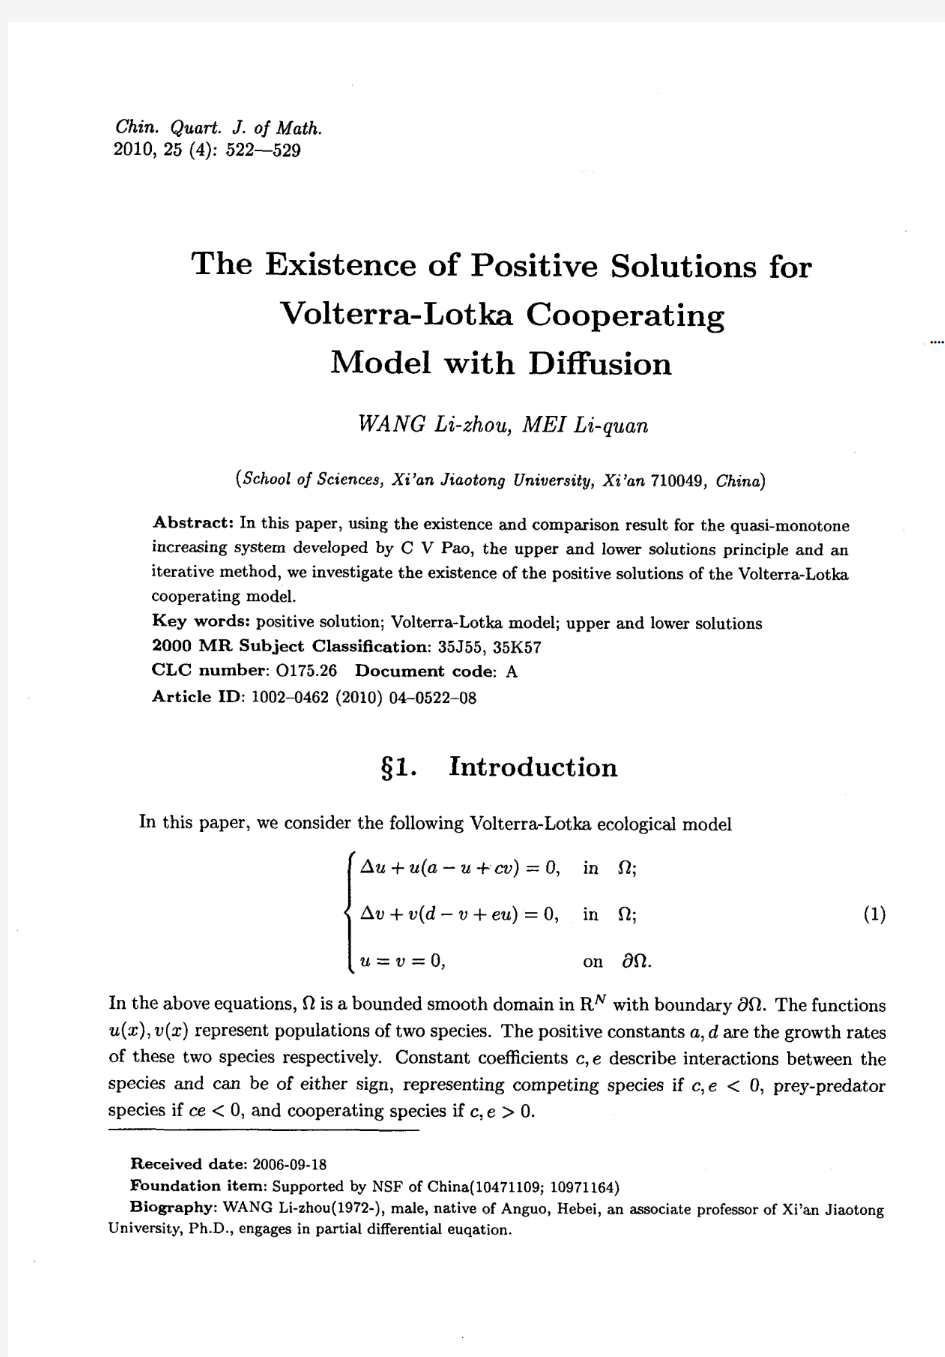 The Existence of Positive Solutions for Volterra-Lotka Cooperating Model with Diffusion